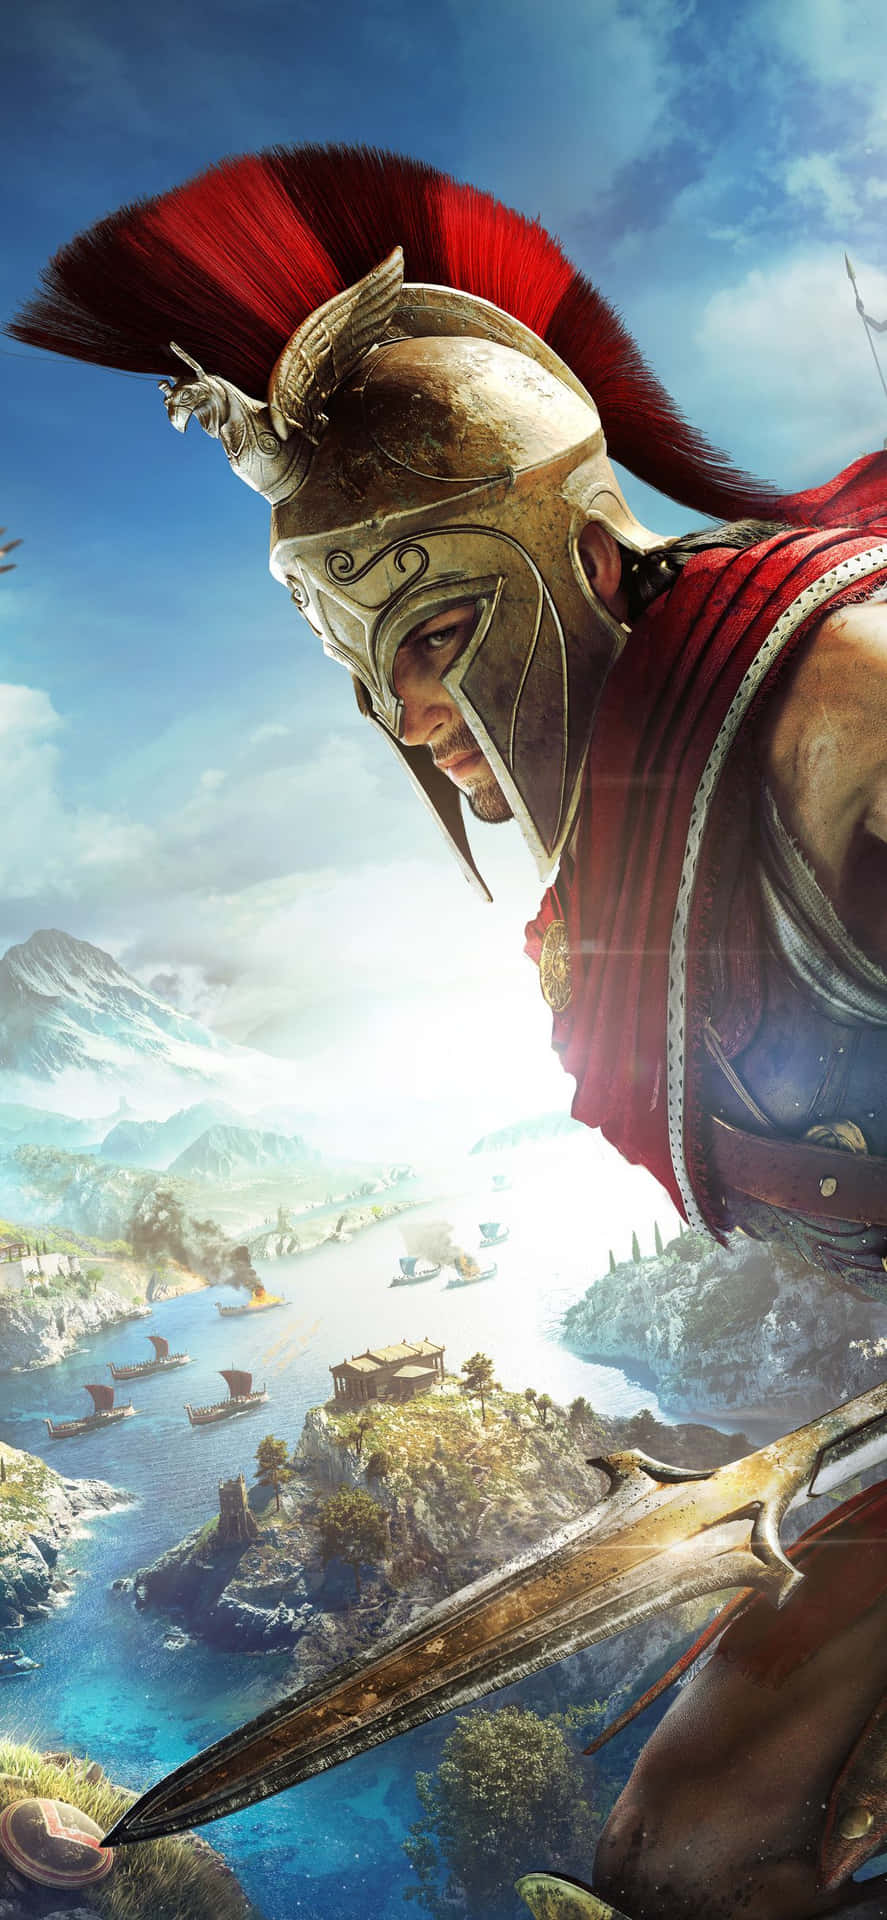 Set sail online with Android Assassin's Creed Odyssey